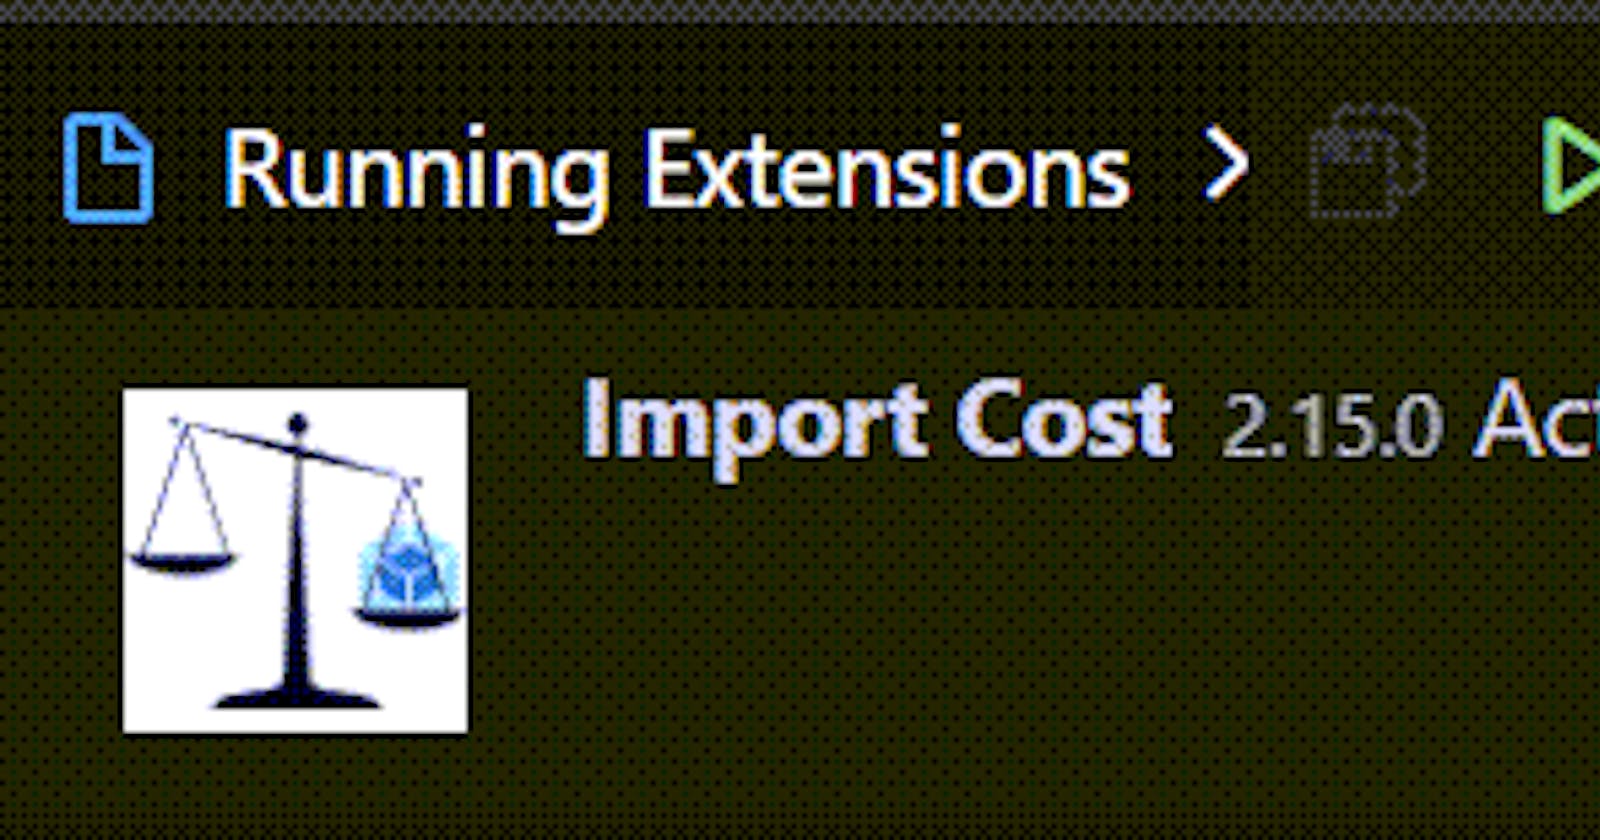 Ironically, the Import Cost extension takes the longest to activate in VS Code